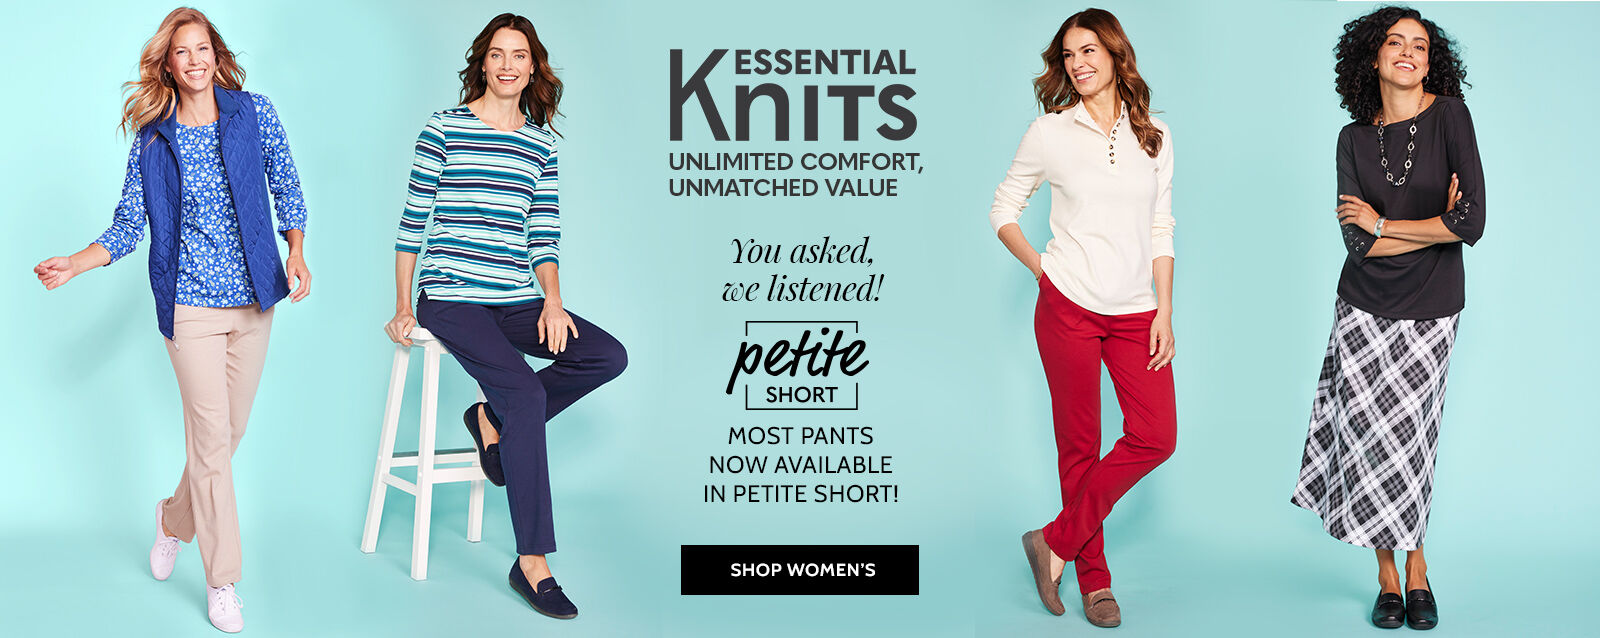 essential knits unlimited comfort, unmatched value you asked, we listened! petite short most pants now available in petite short! shop women's